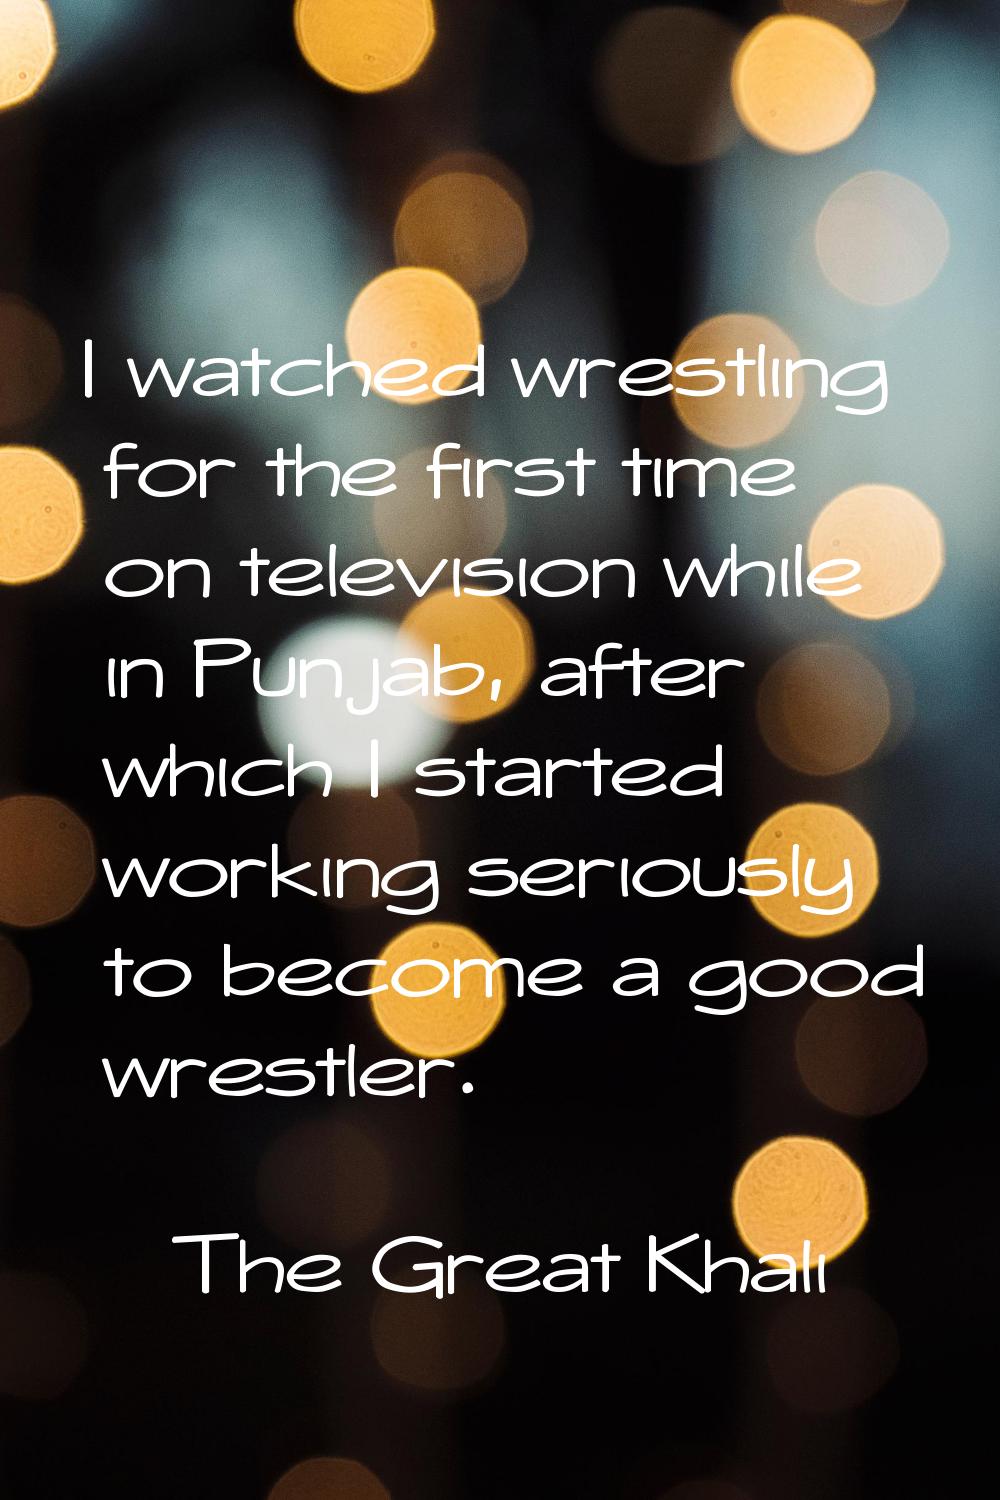 I watched wrestling for the first time on television while in Punjab, after which I started working